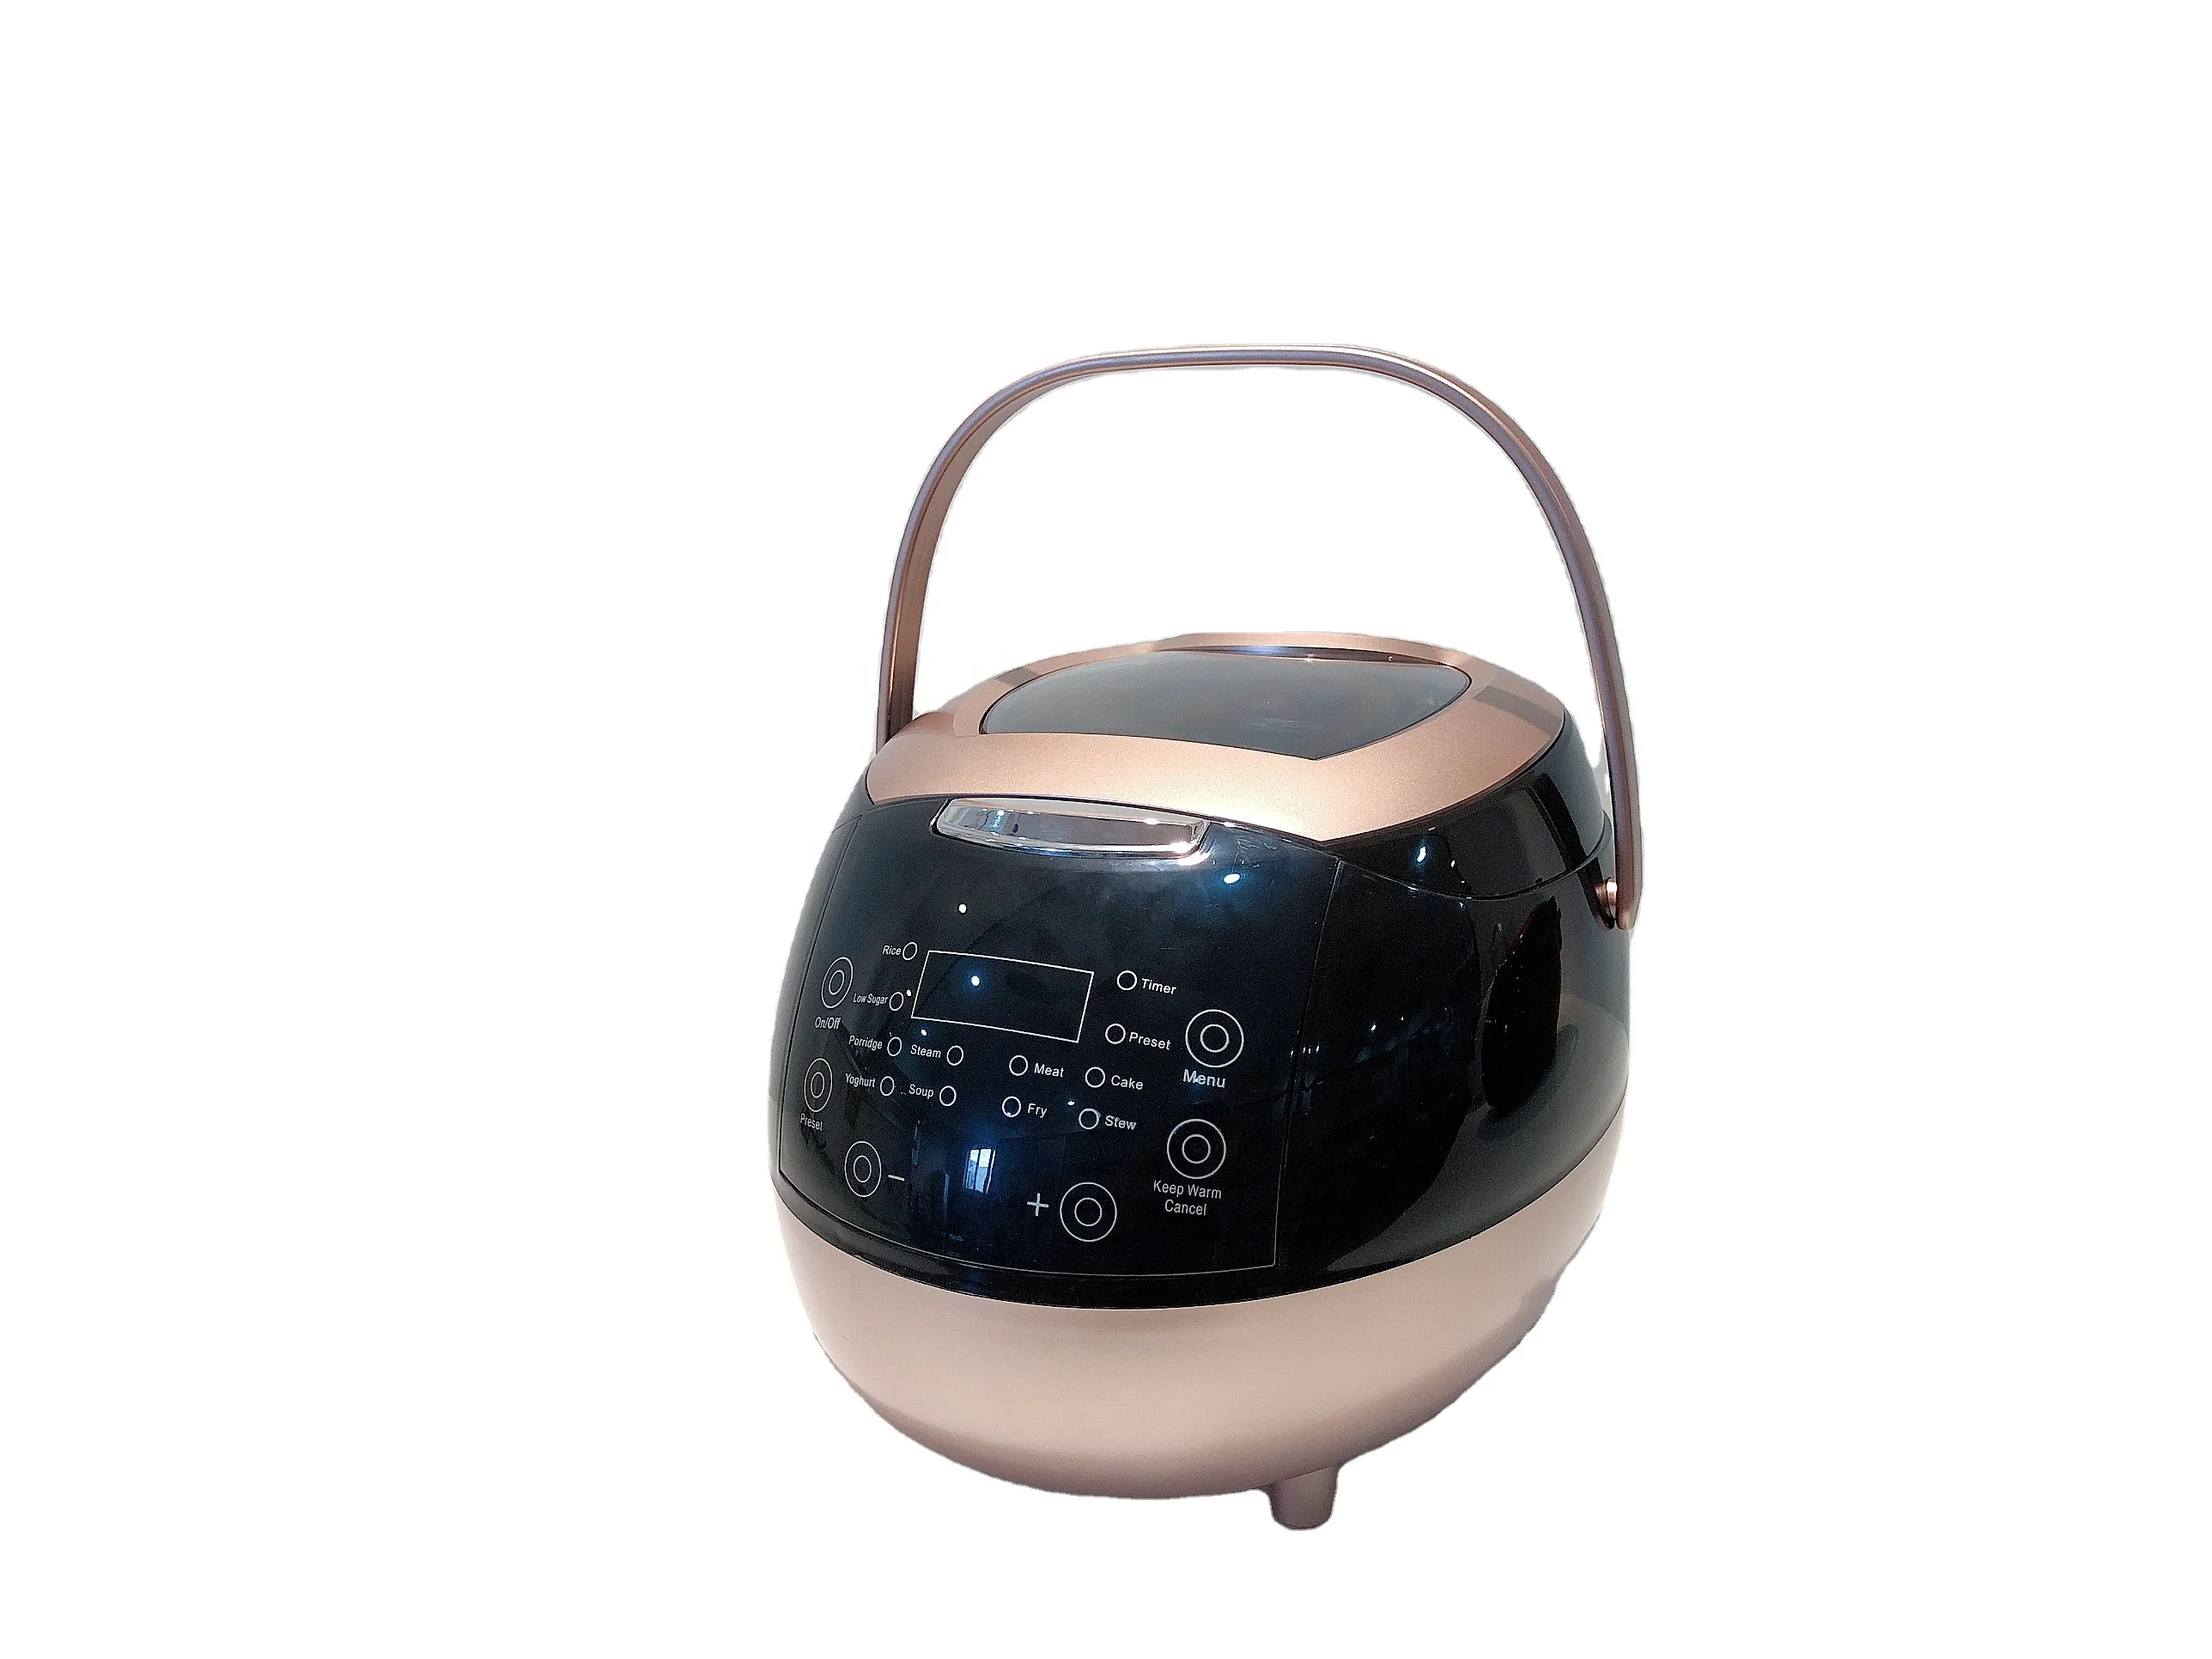 
220v national electric multi cooker 8 in 1 low sugar rice cooker 5L high quality claypot rice cooker 